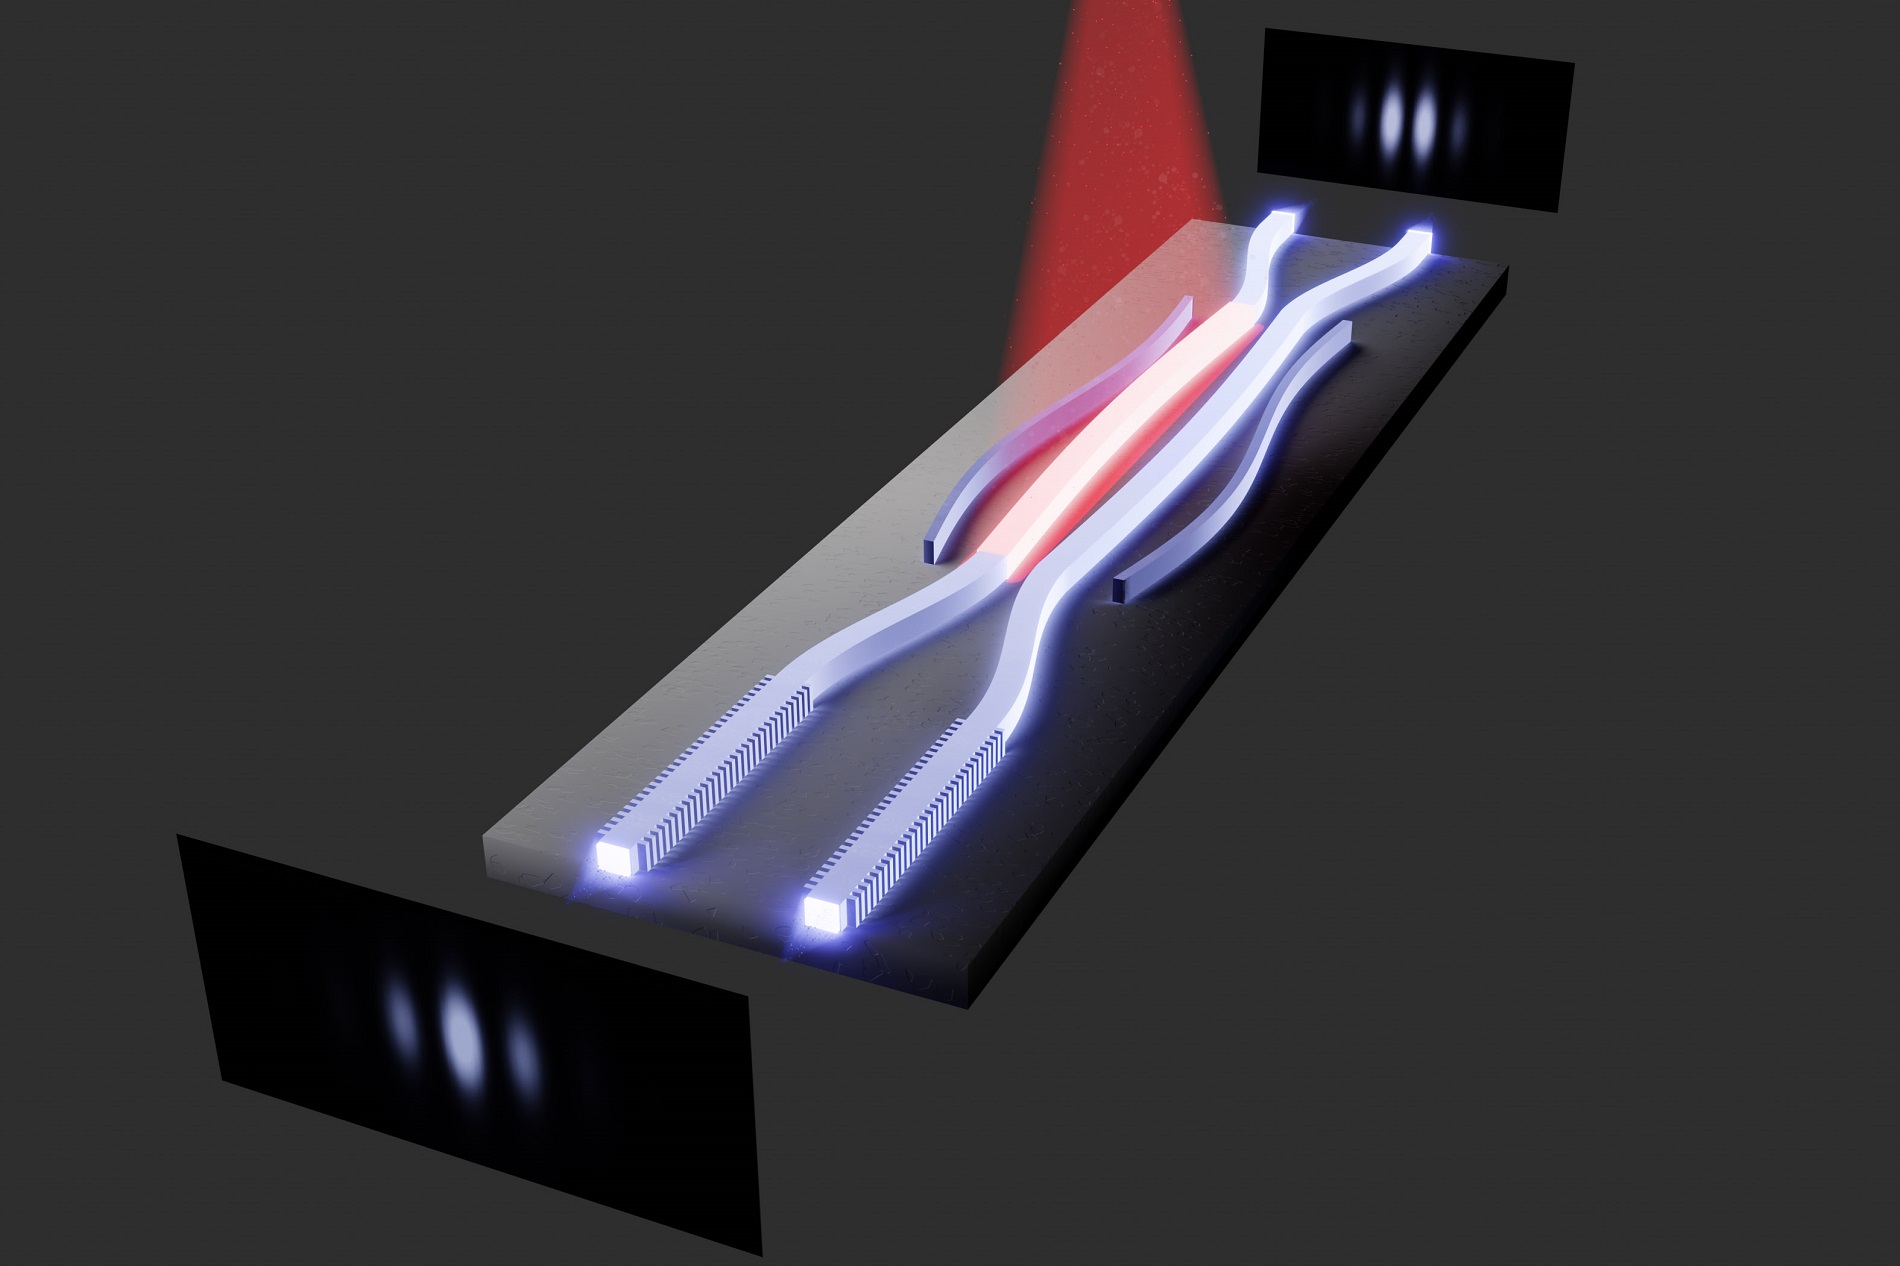 The light can travel back and forth in the two closely spaced waveguides and is partially reflected at their ends.